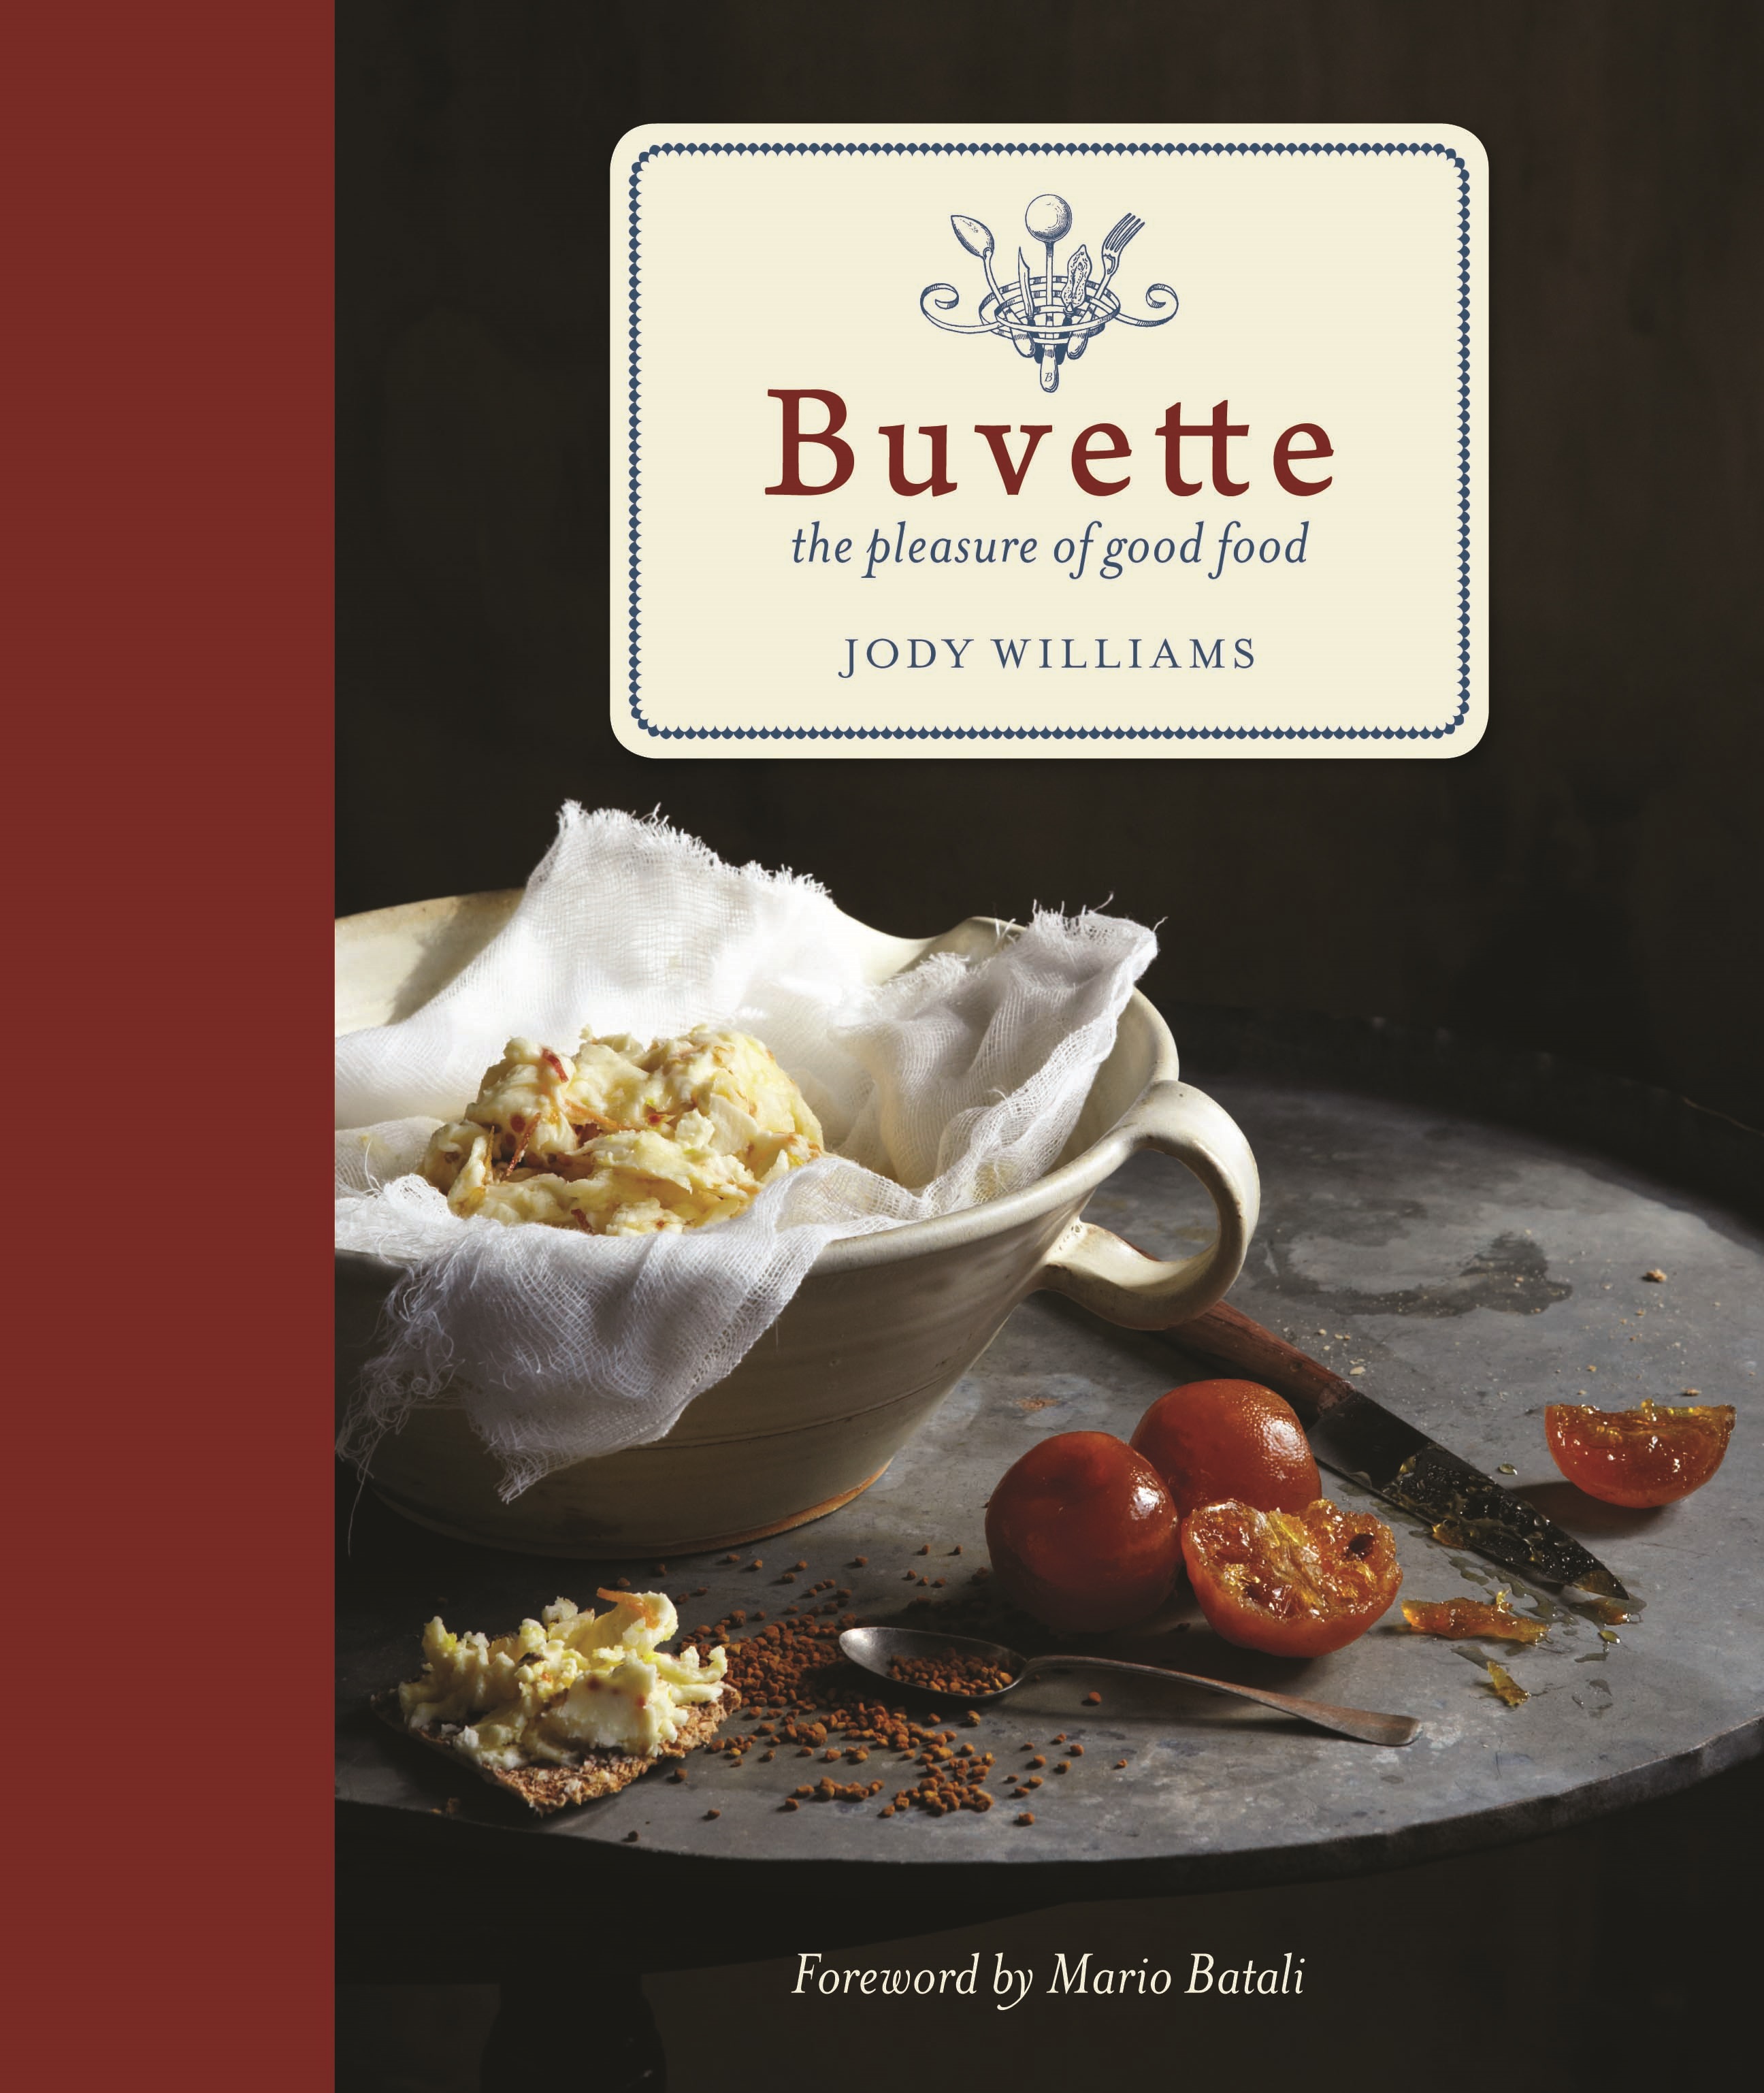 Buvette, the book, debuts today, April 22, 2014.